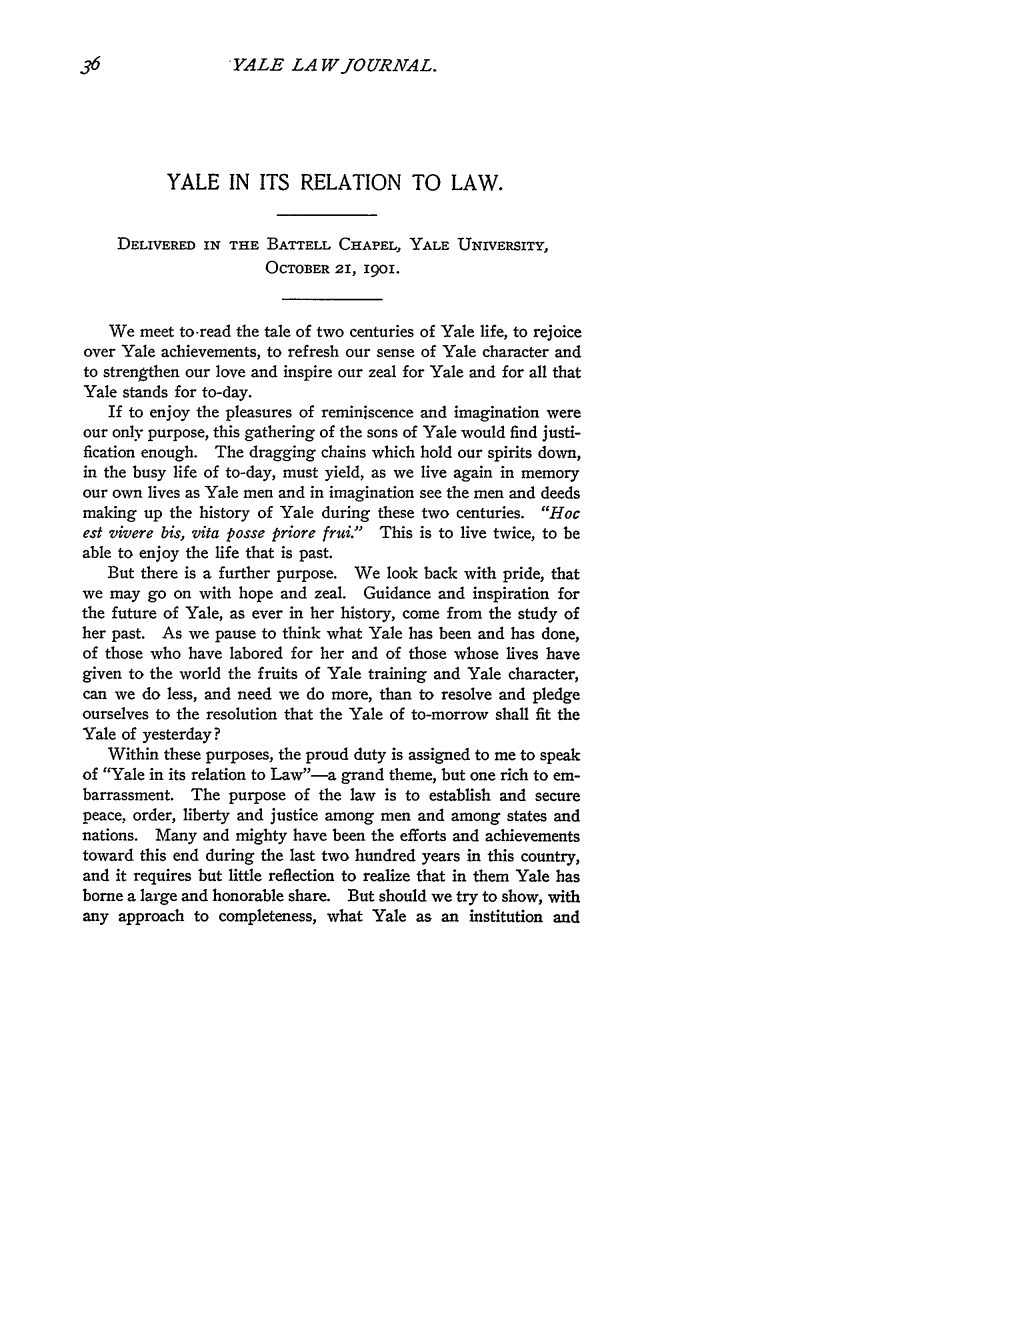 Yale in Its Relation to Law